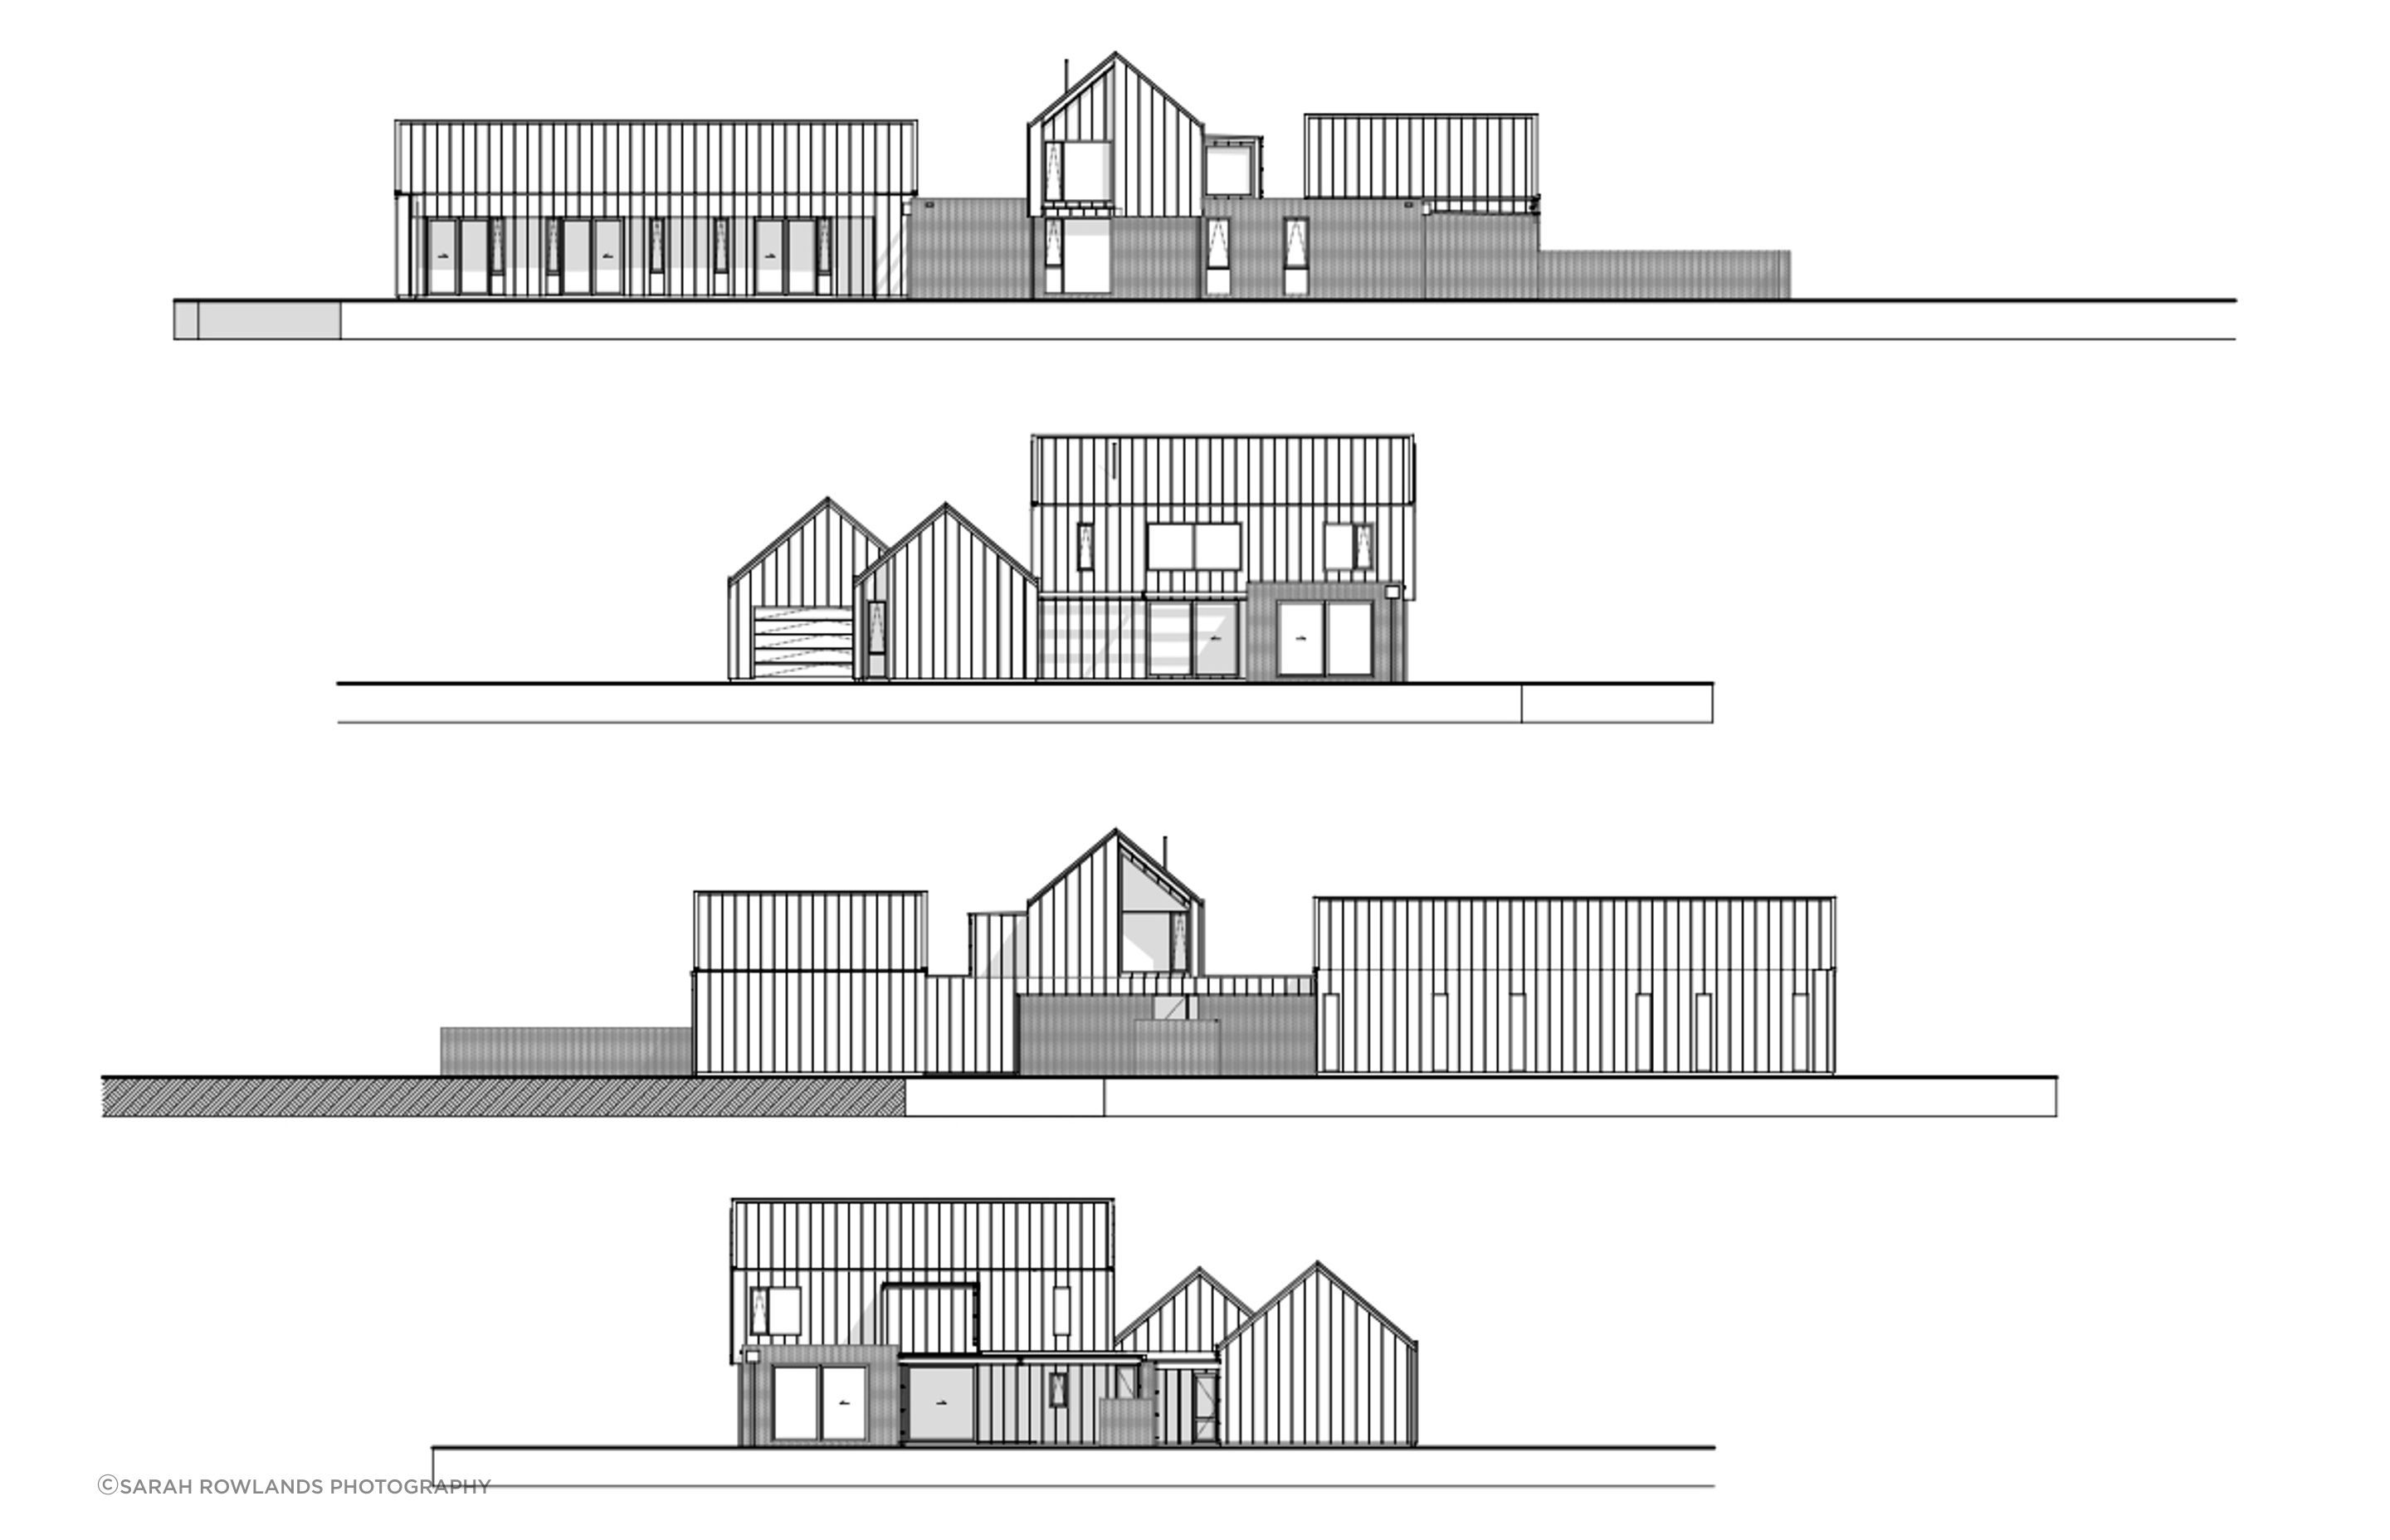 Elevations by Arthouse Architects, facing north, east, south and west (from top to bottom).